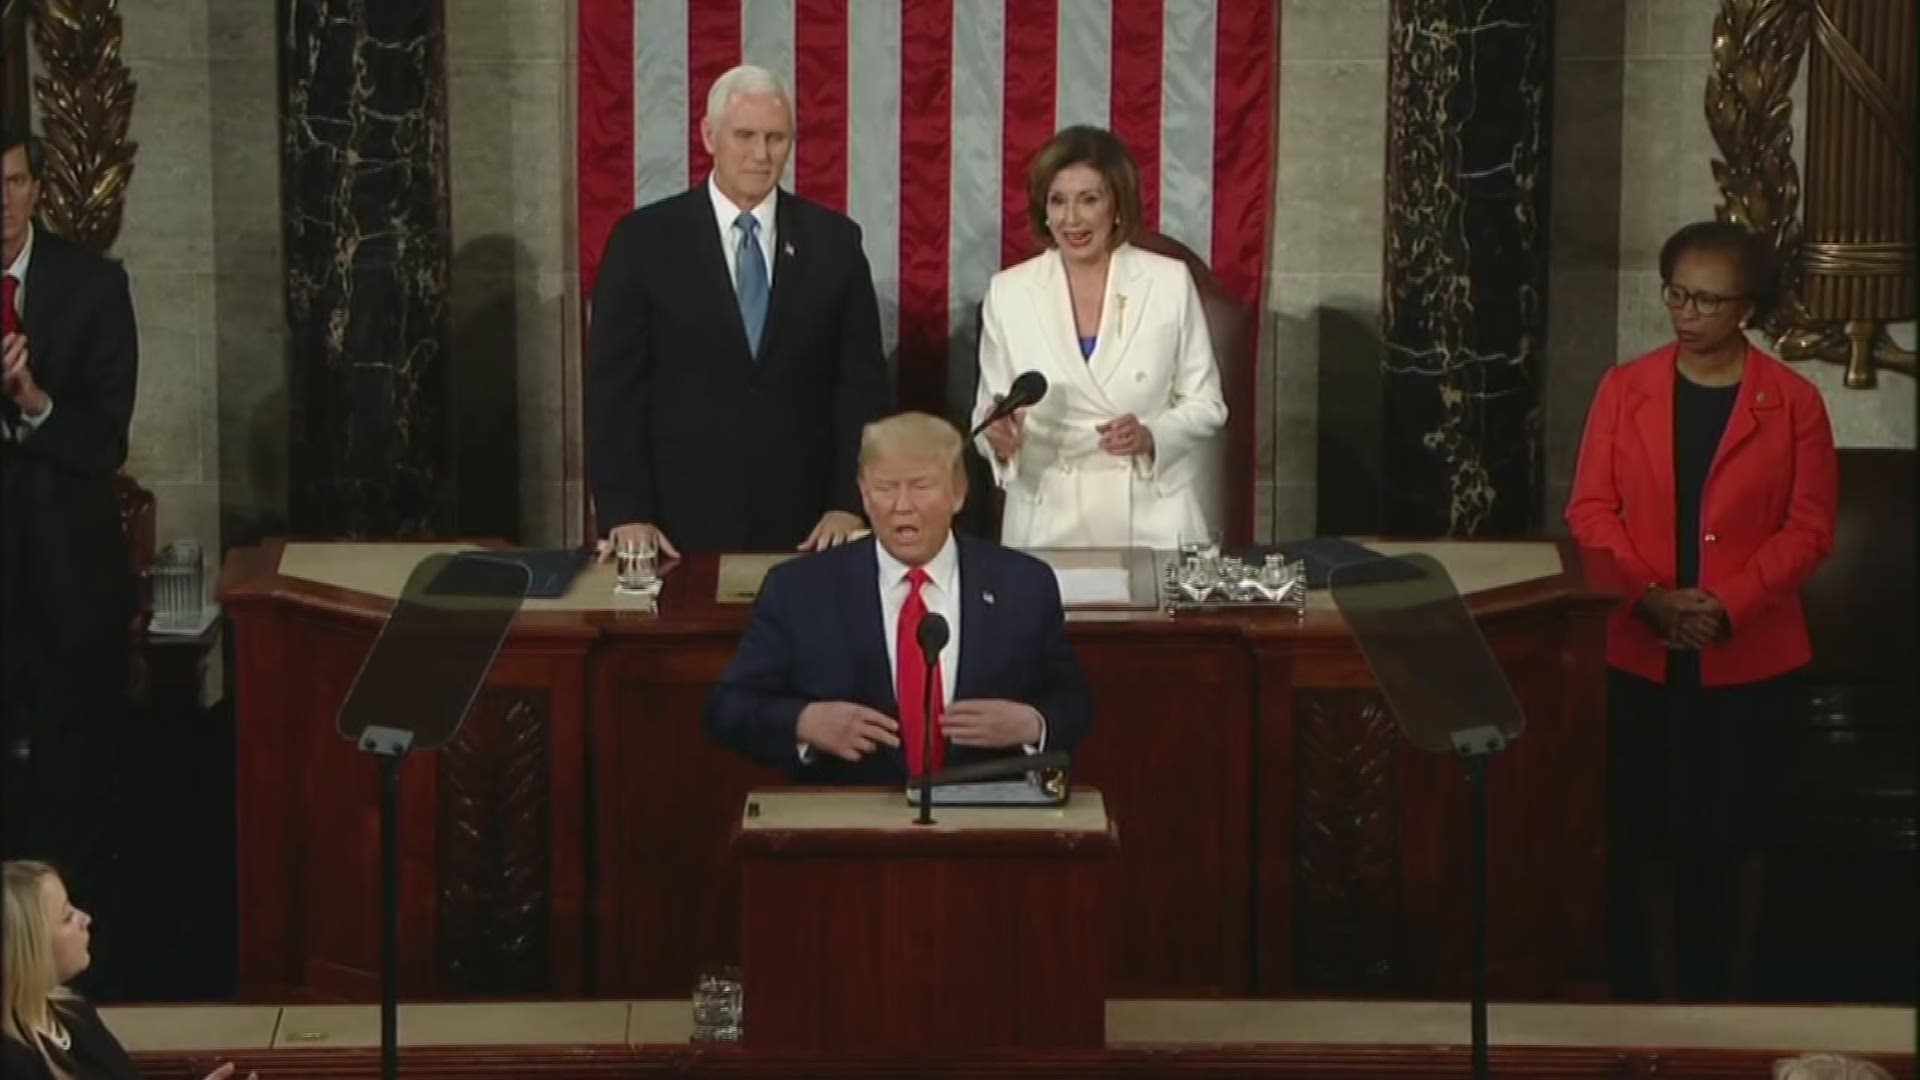 President Donald Trump arrives to the House chamber to deliver his third State of the Union speech, appearing unwilling to shake Speaker Pelosi's hand.